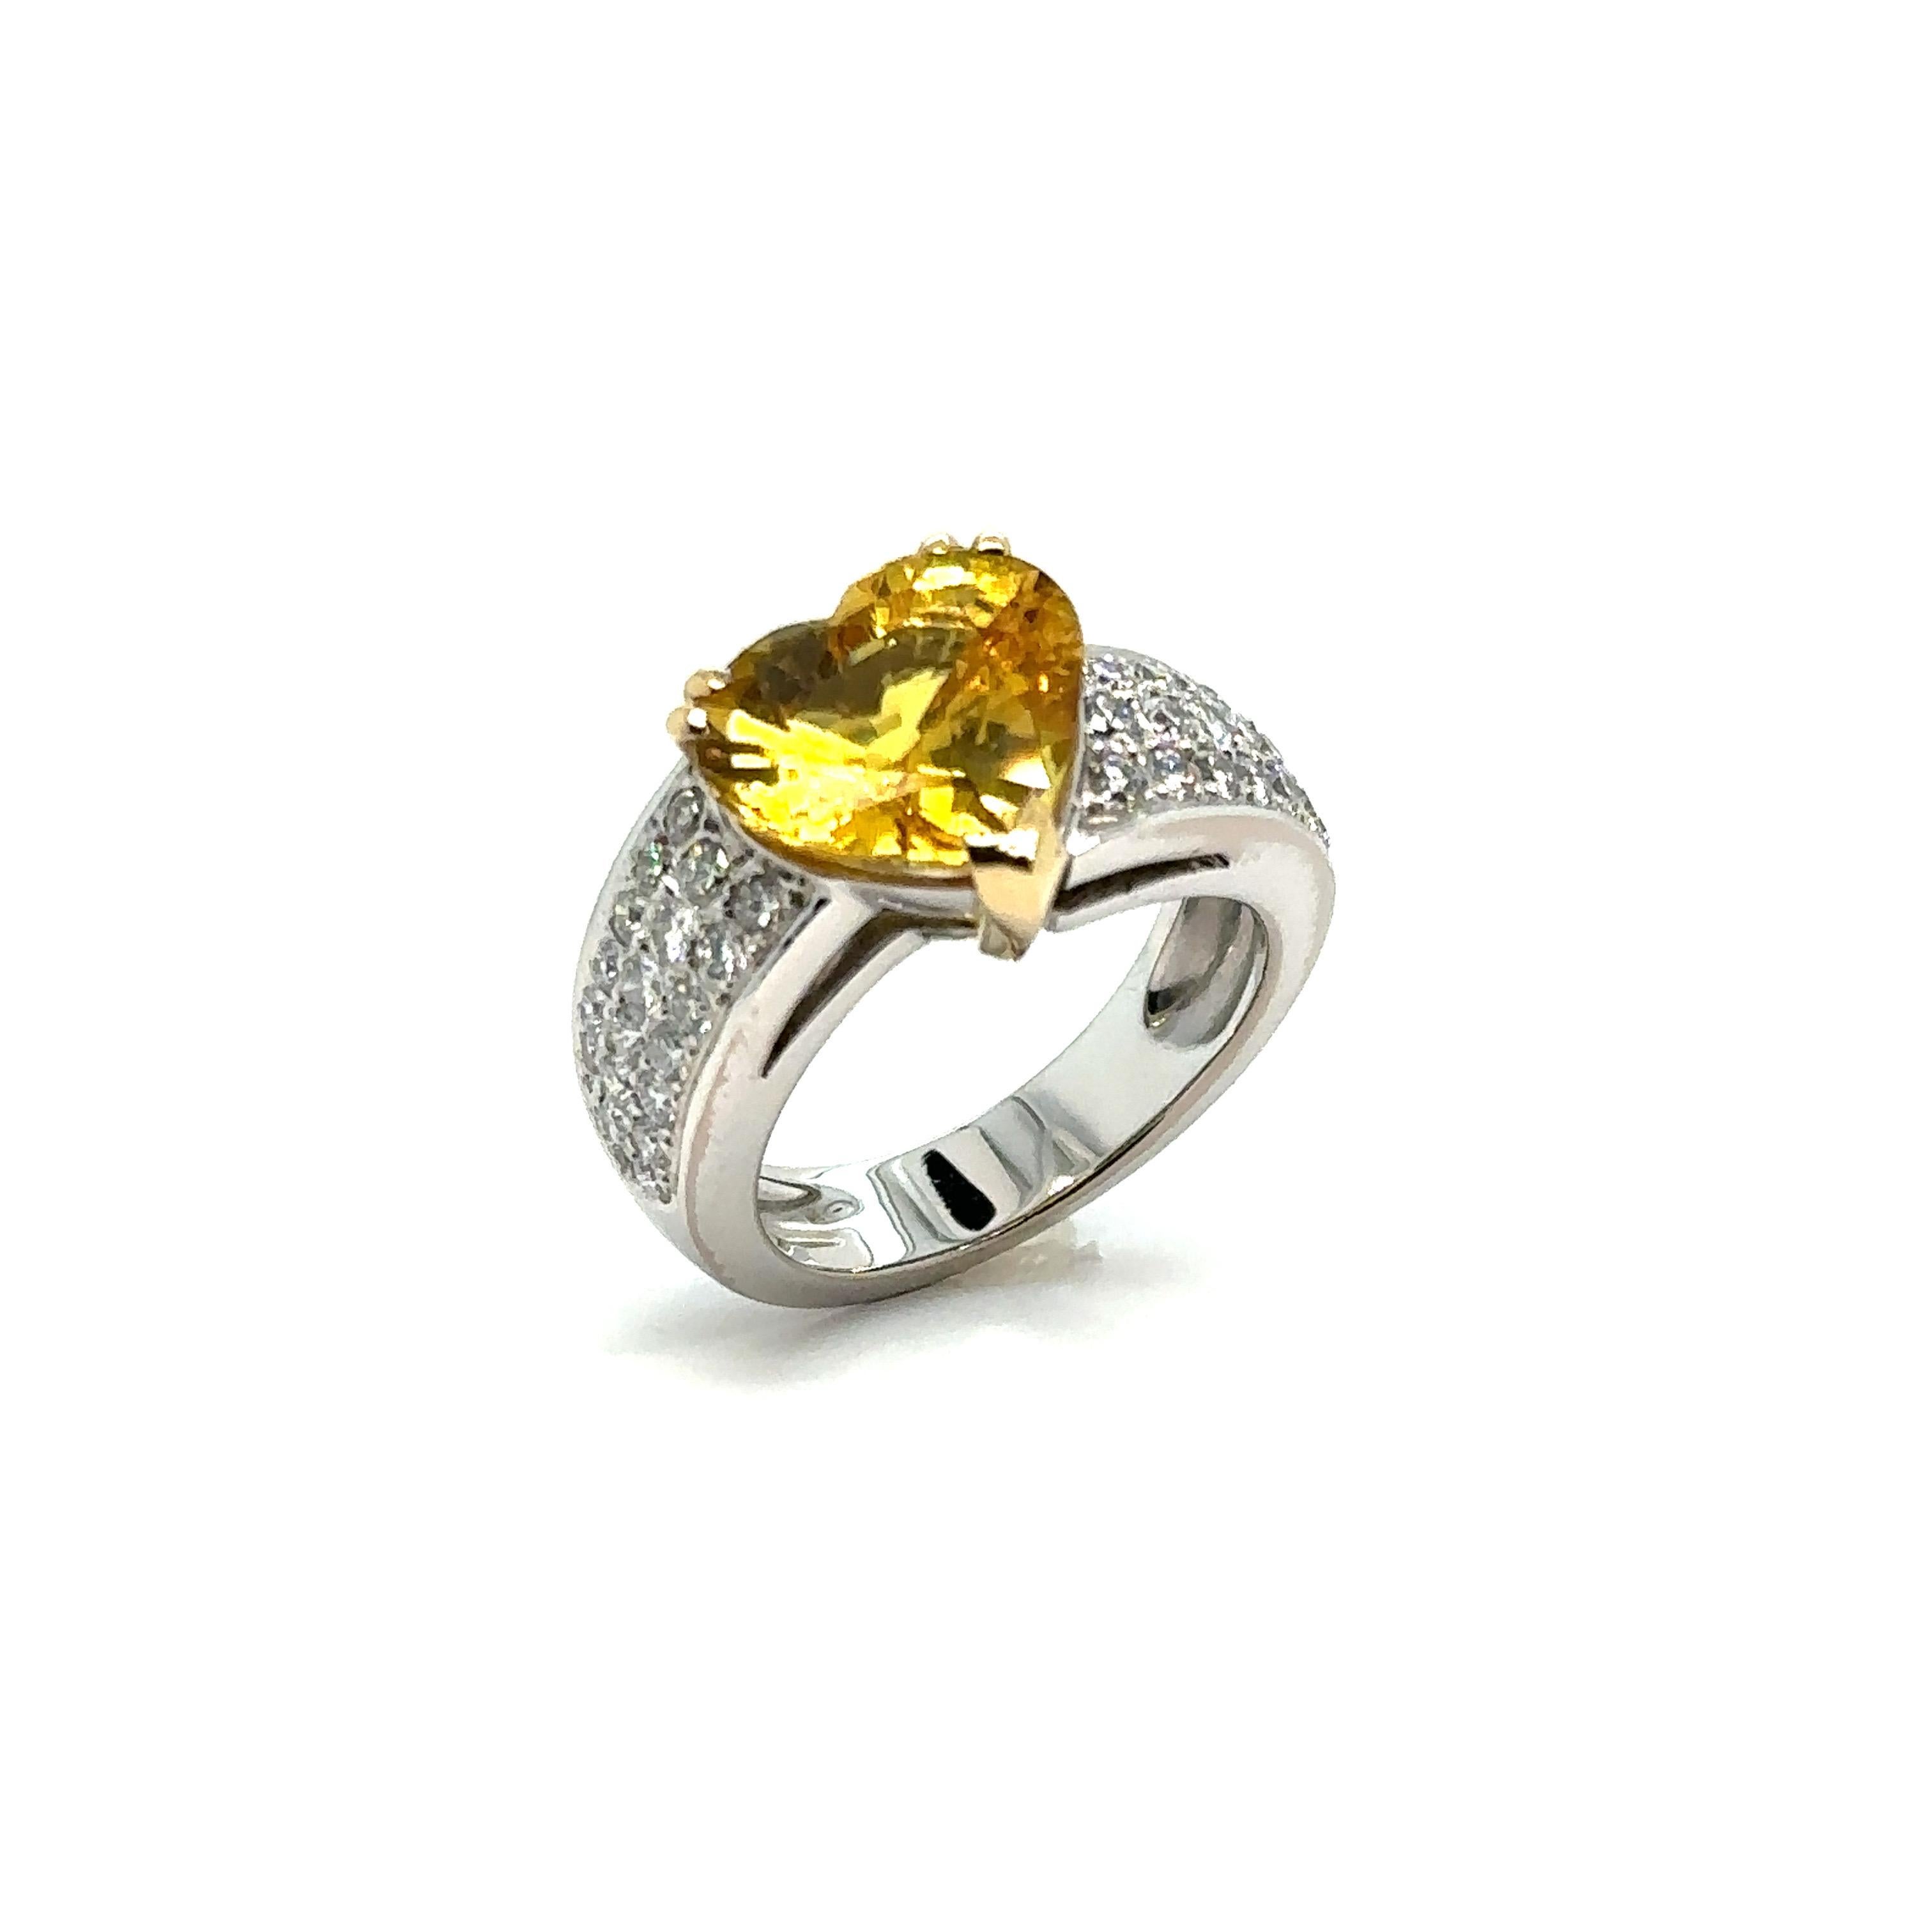 Heart Cut French Ring, Yellow Sapphire Heart, Pavage Diamonds